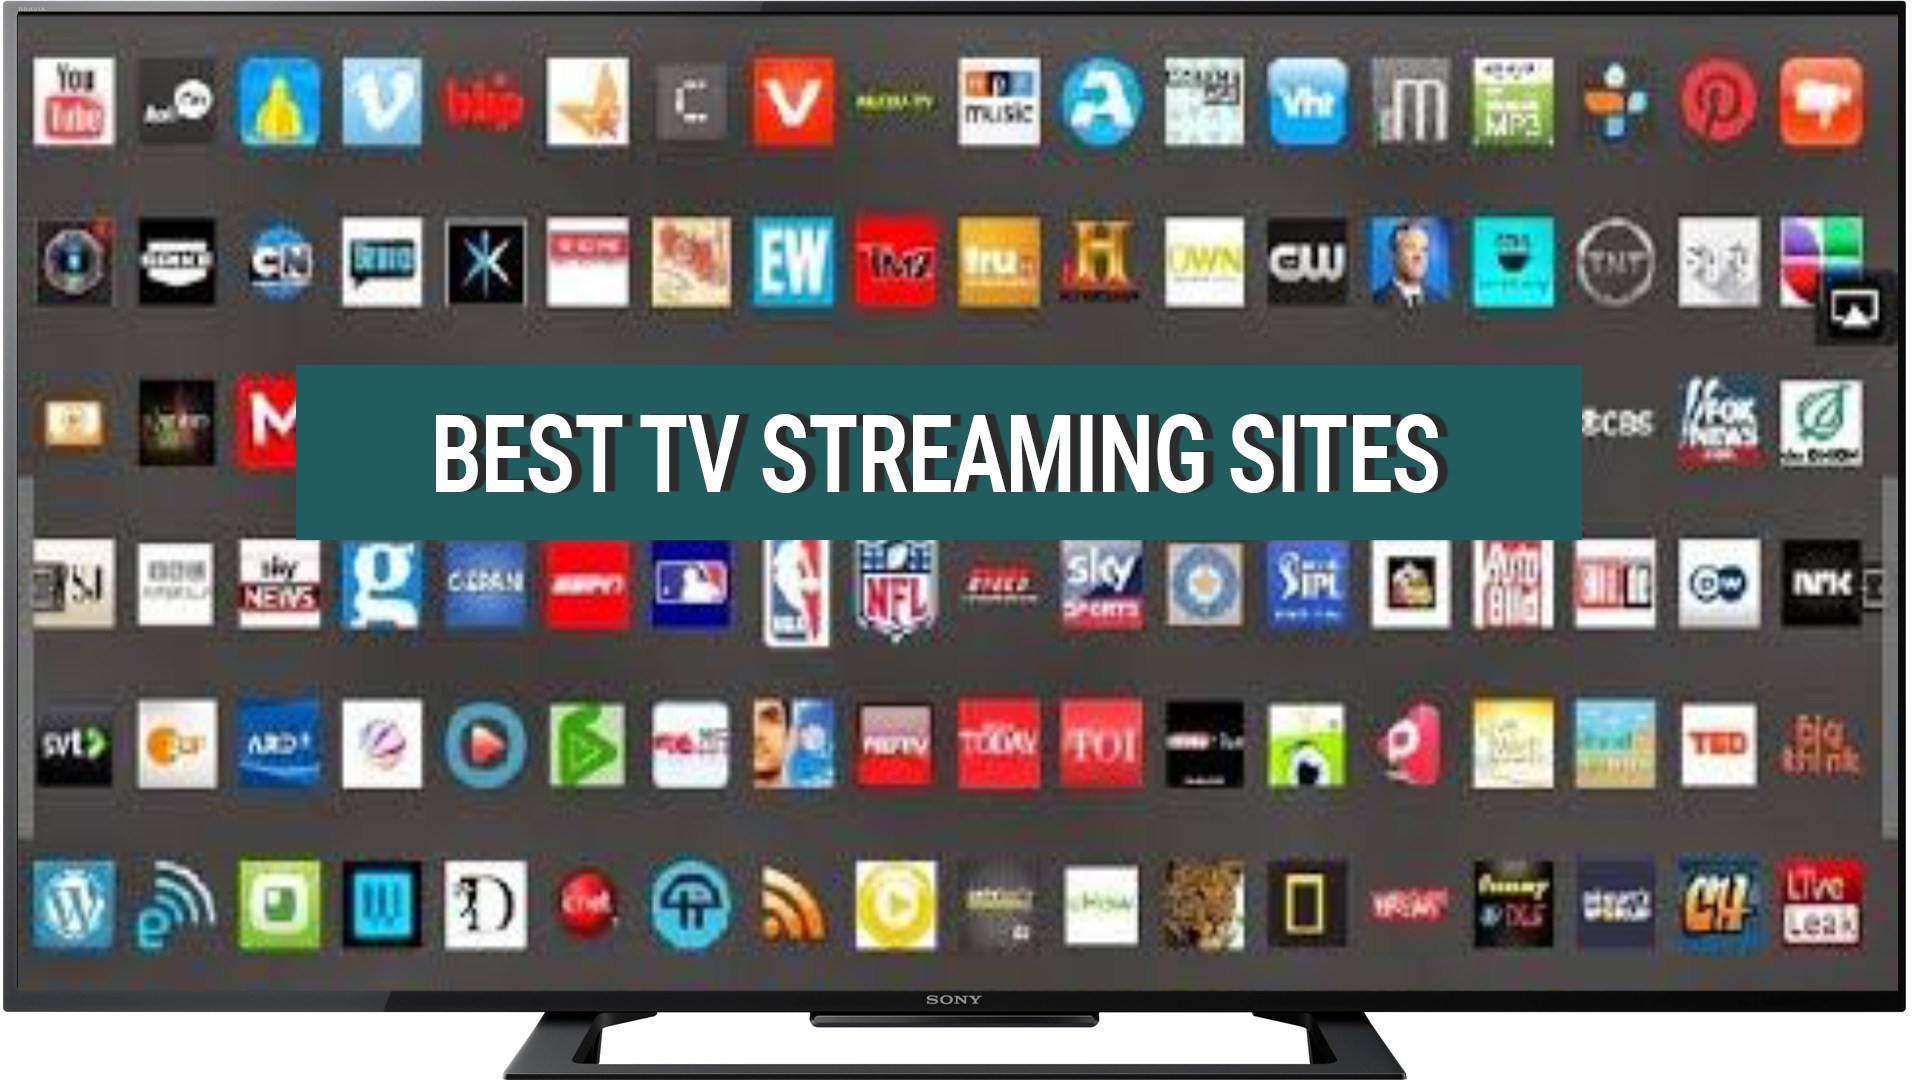 Free TV Streaming Sites - Best Free Streaming Sites for Movies and TV